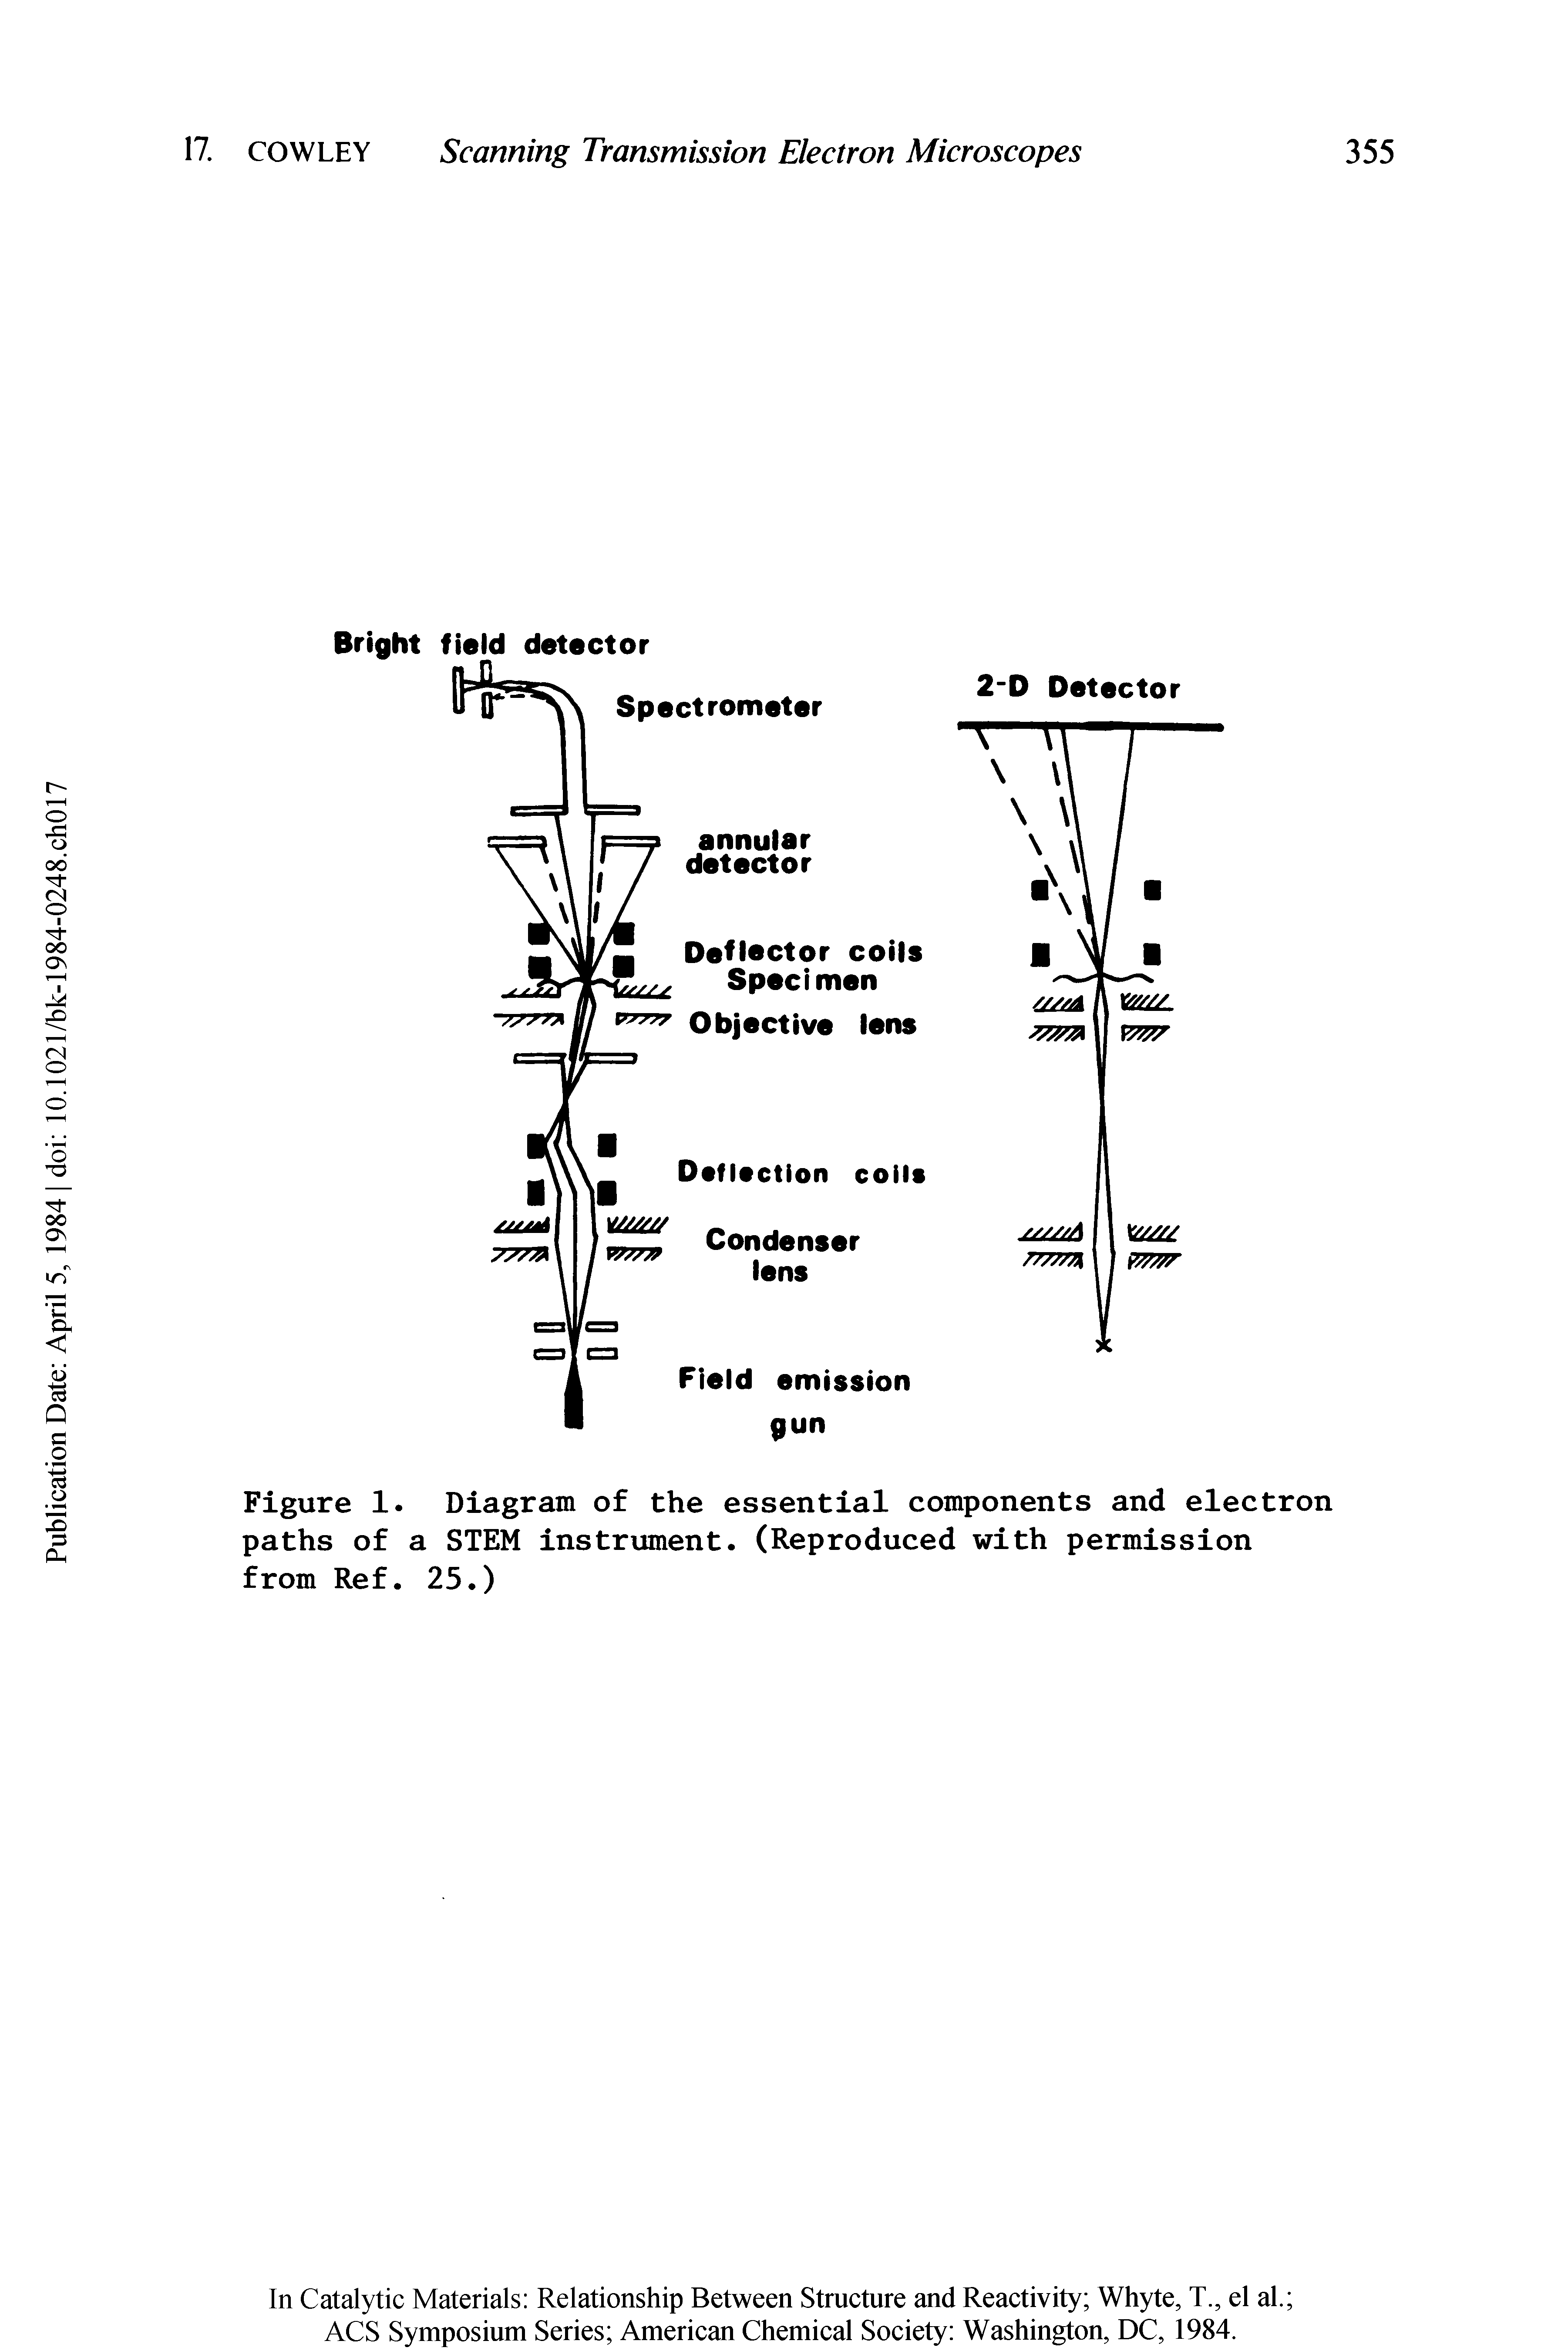 Figure 1. Diagram of the essential components and electron paths of a STEM instrument. (Reproduced with permission from Ref. 25.)...